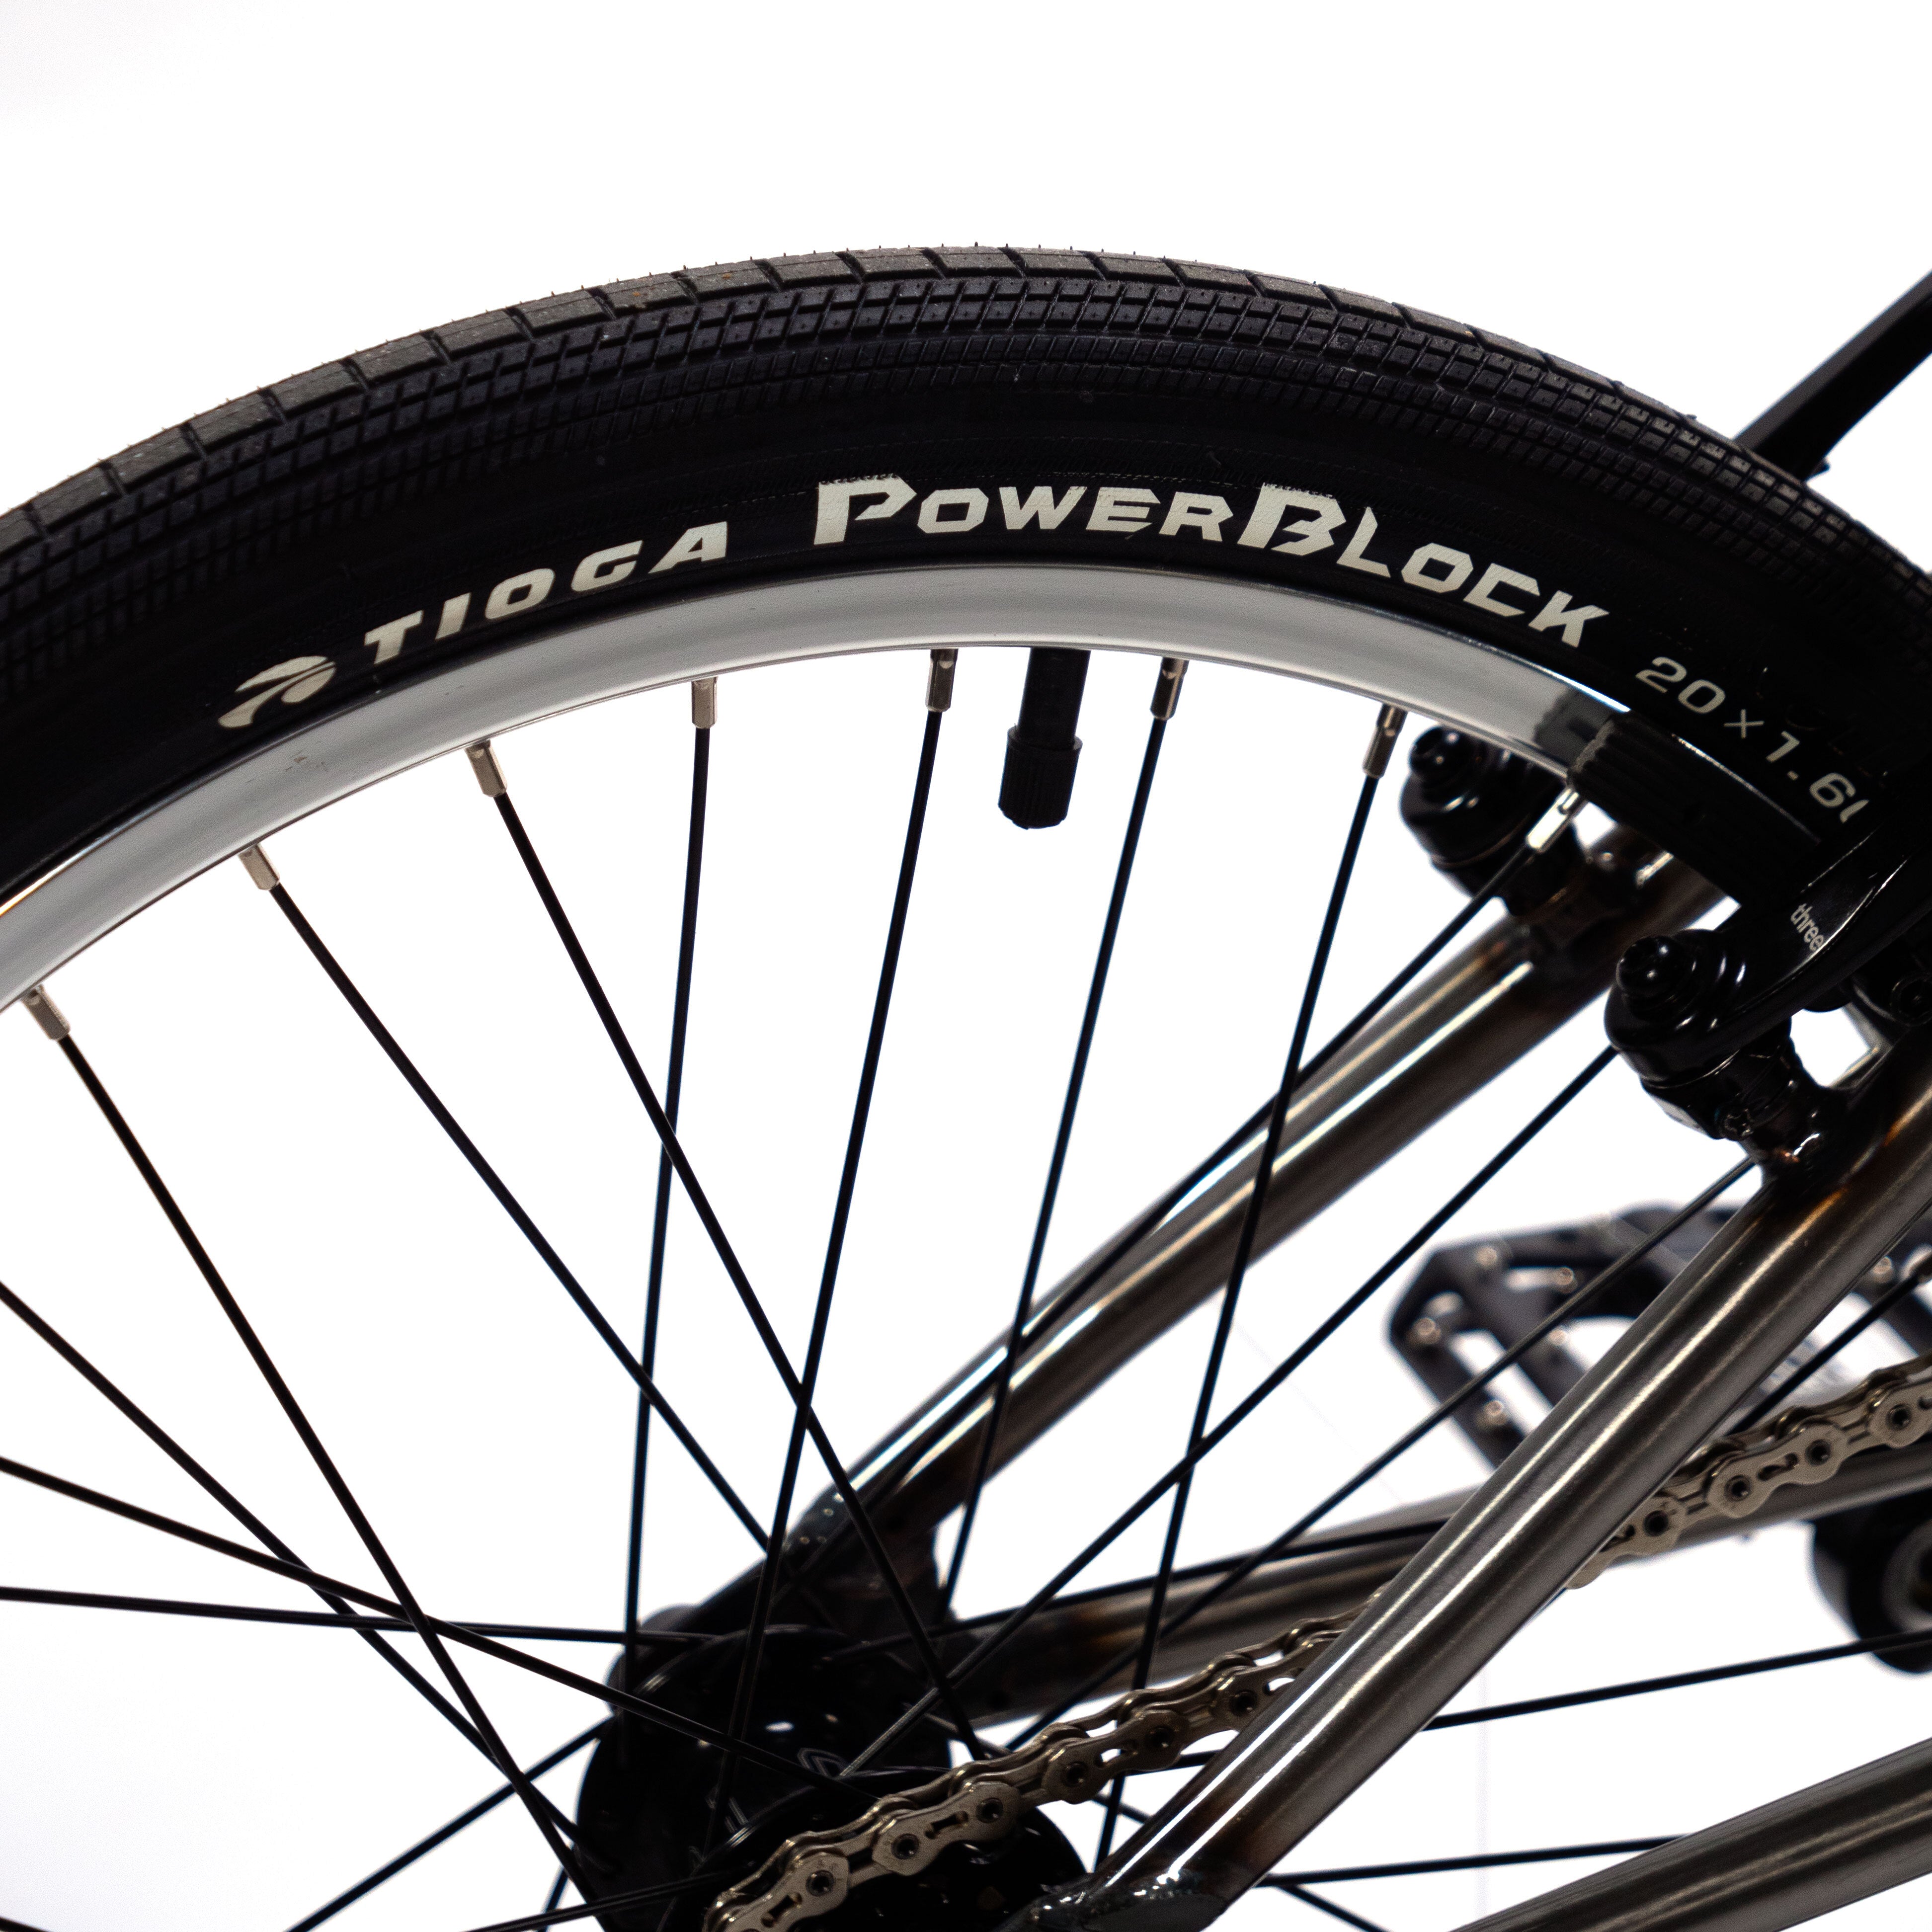 A close up of a Cult Vick Behm Custom Race Bike tire with the word powerblock on it, featuring Spectre NME carbon rims.